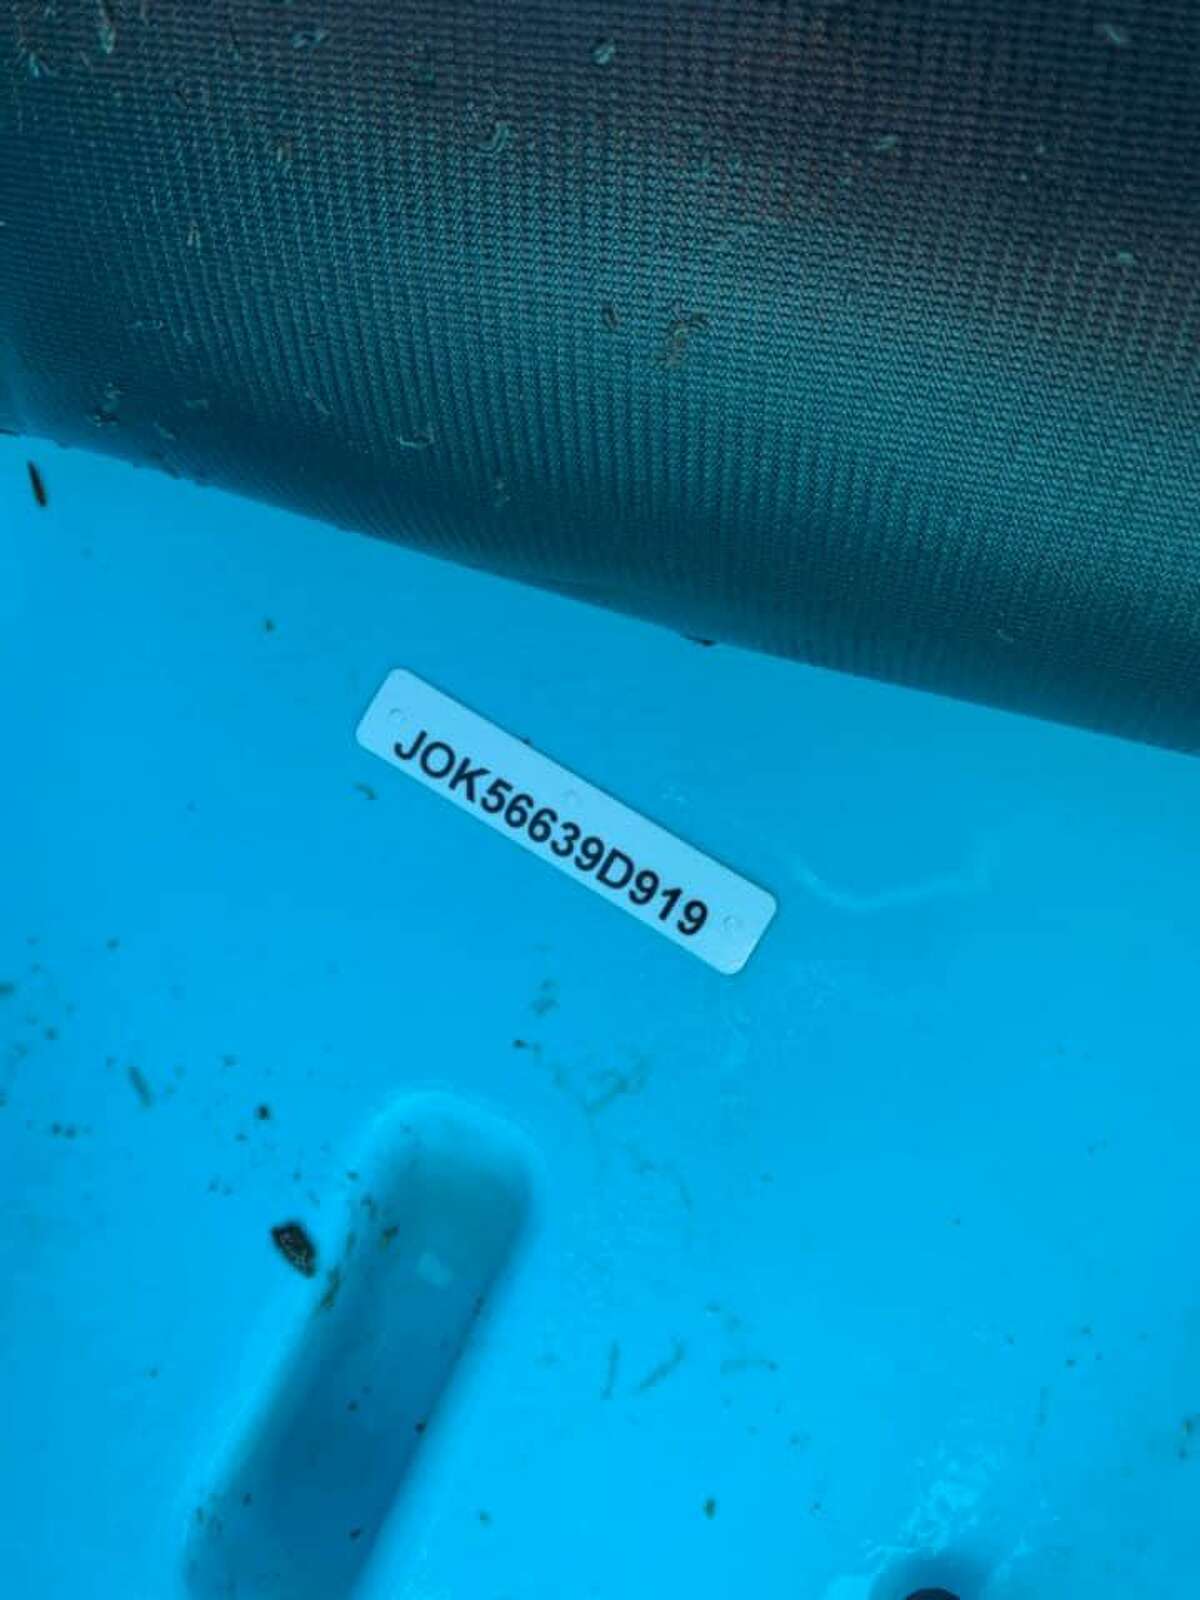 The identifying number on the kayak found unoccupied at the Fort Trumbull State Park fishing pier in New London, Conn. on Sunday, Nov. 8, 2020.